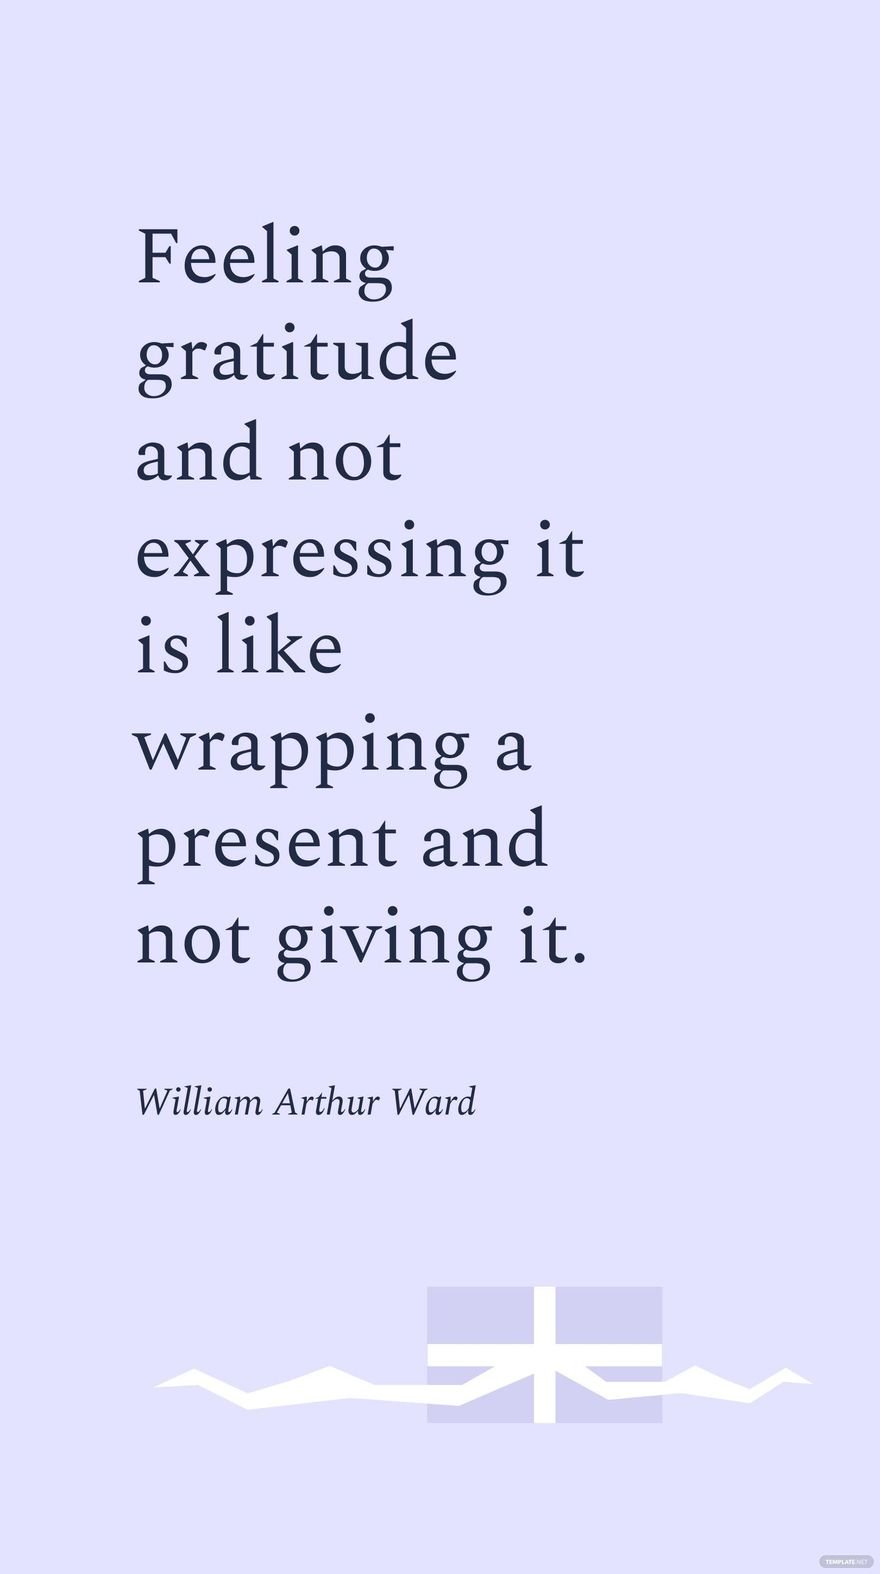 William Arthur Ward - Feeling gratitude and not expressing it is like wrapping a present and not giving it. 